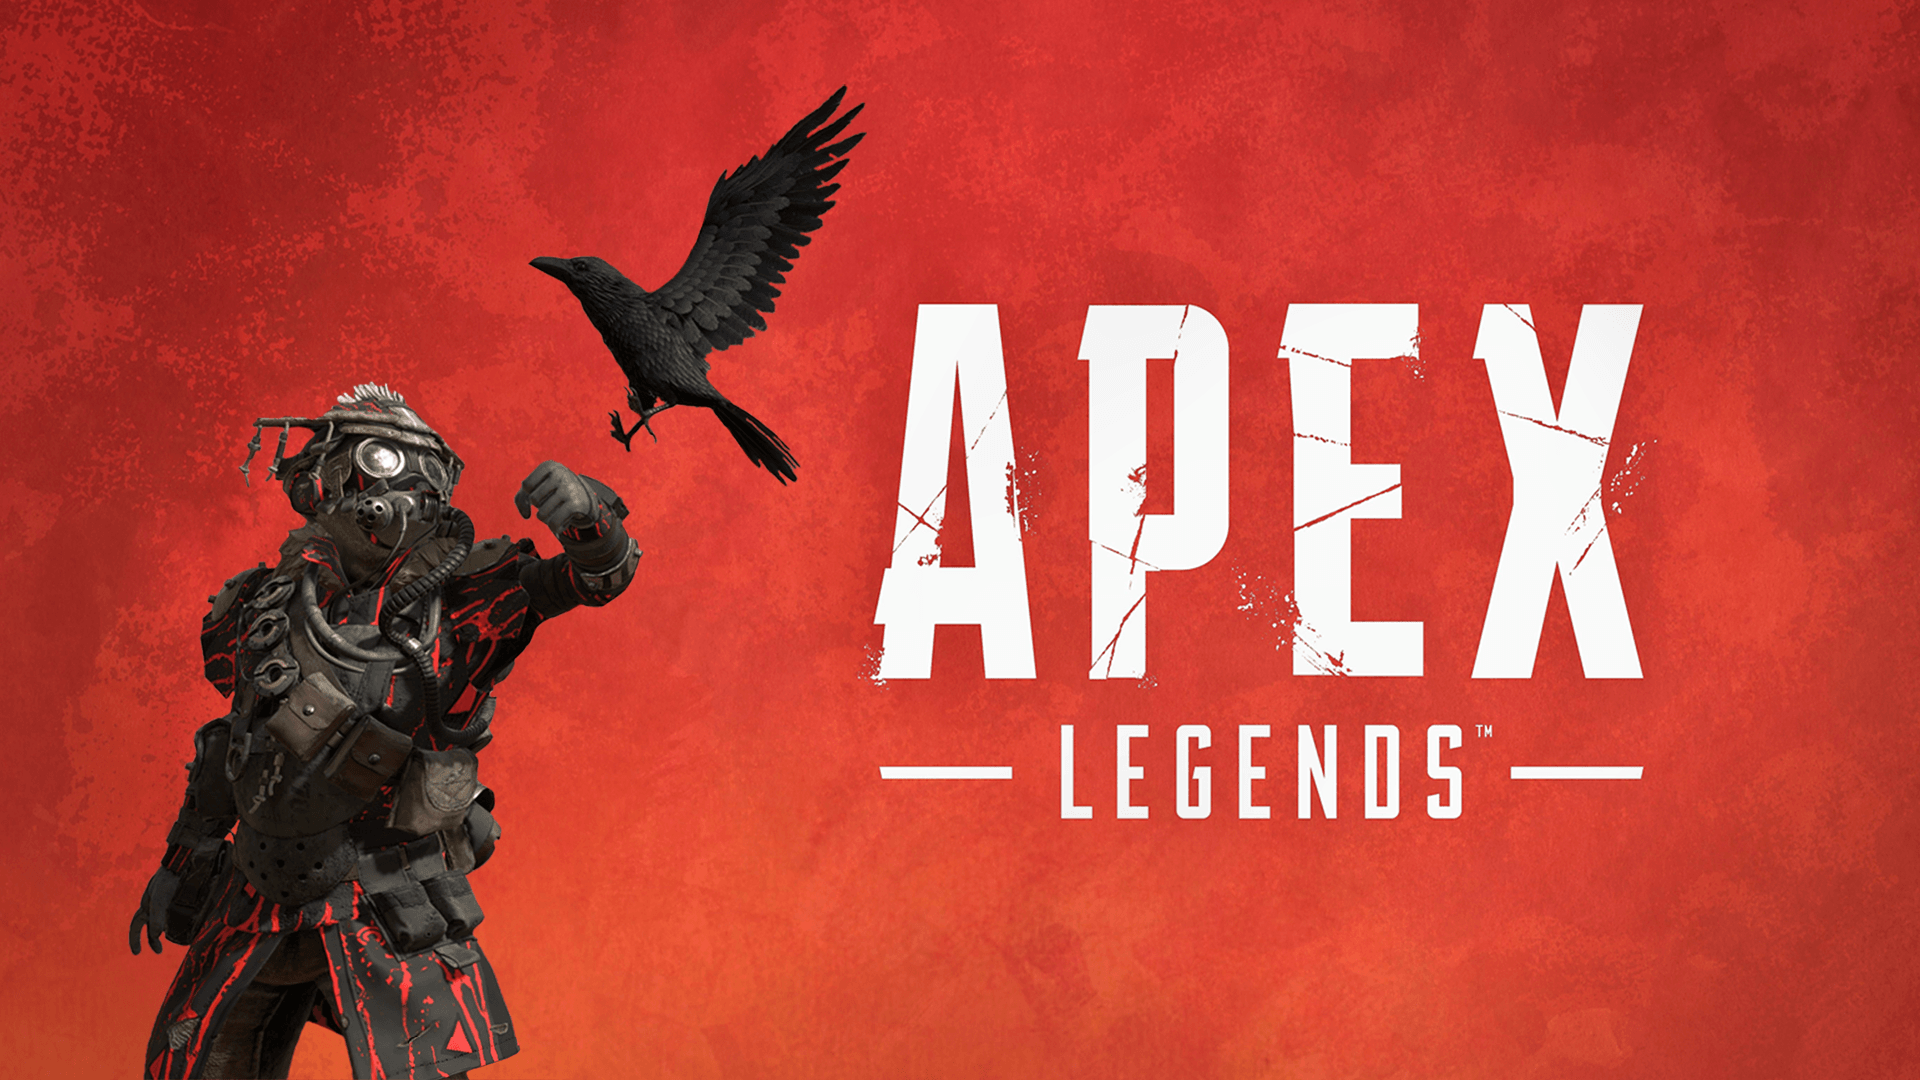 Wallpapers : Apex Legends, blood hound, red, crow, raven 1920x1080